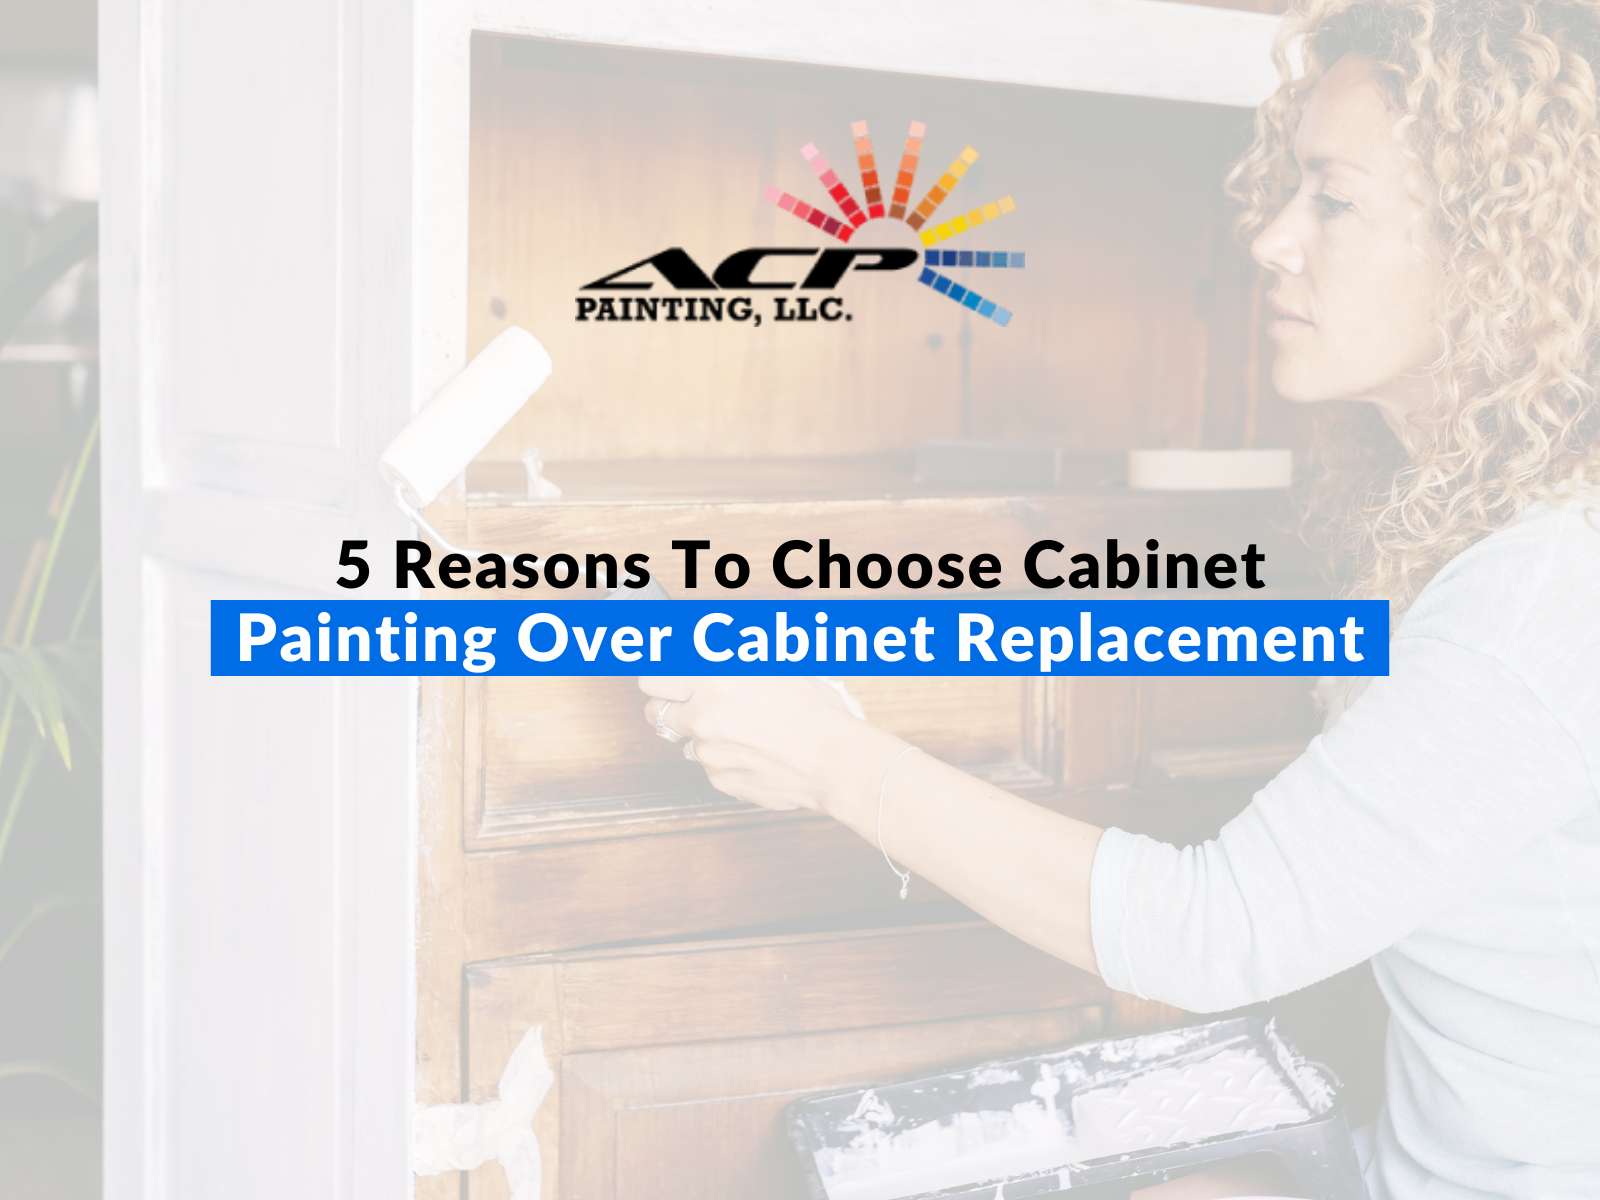 5 Reasons To Choose Cabinet Painting Over Cabinet Replacement